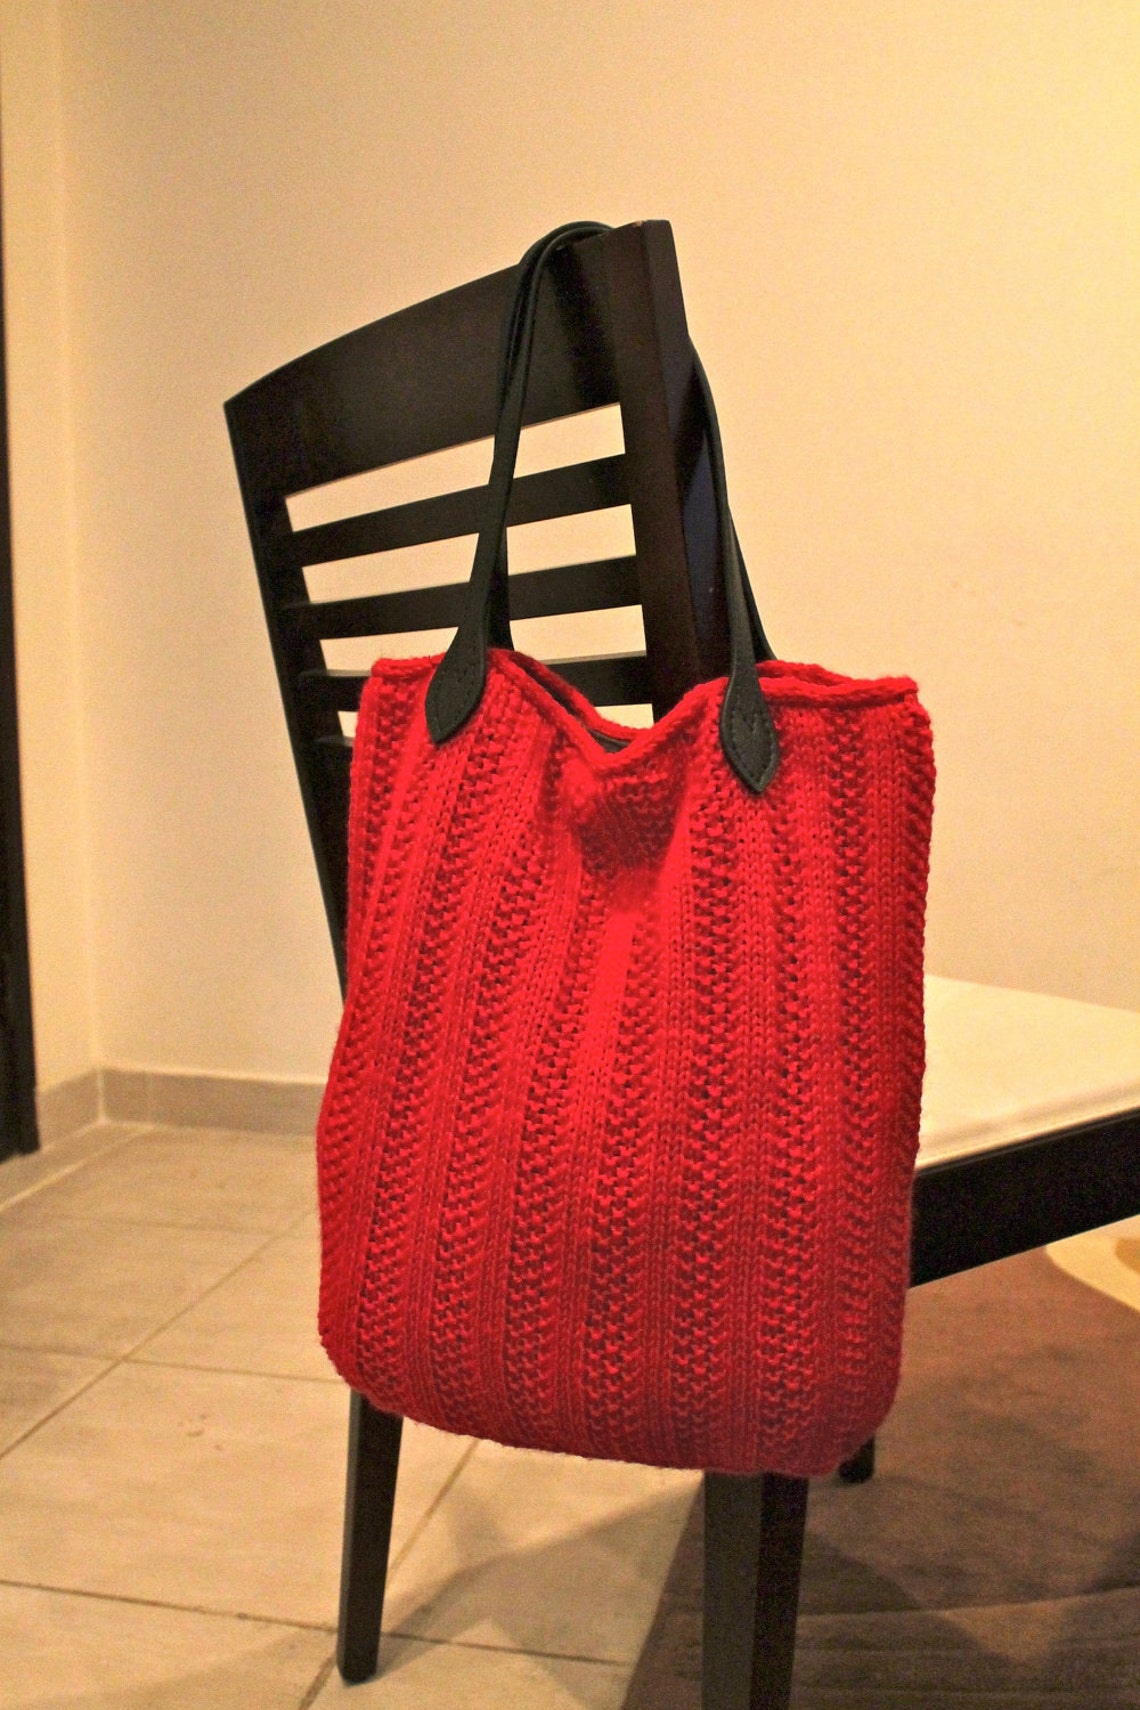 Knitted Market Bag Tote Pattern ribby Tote Instant - Etsy